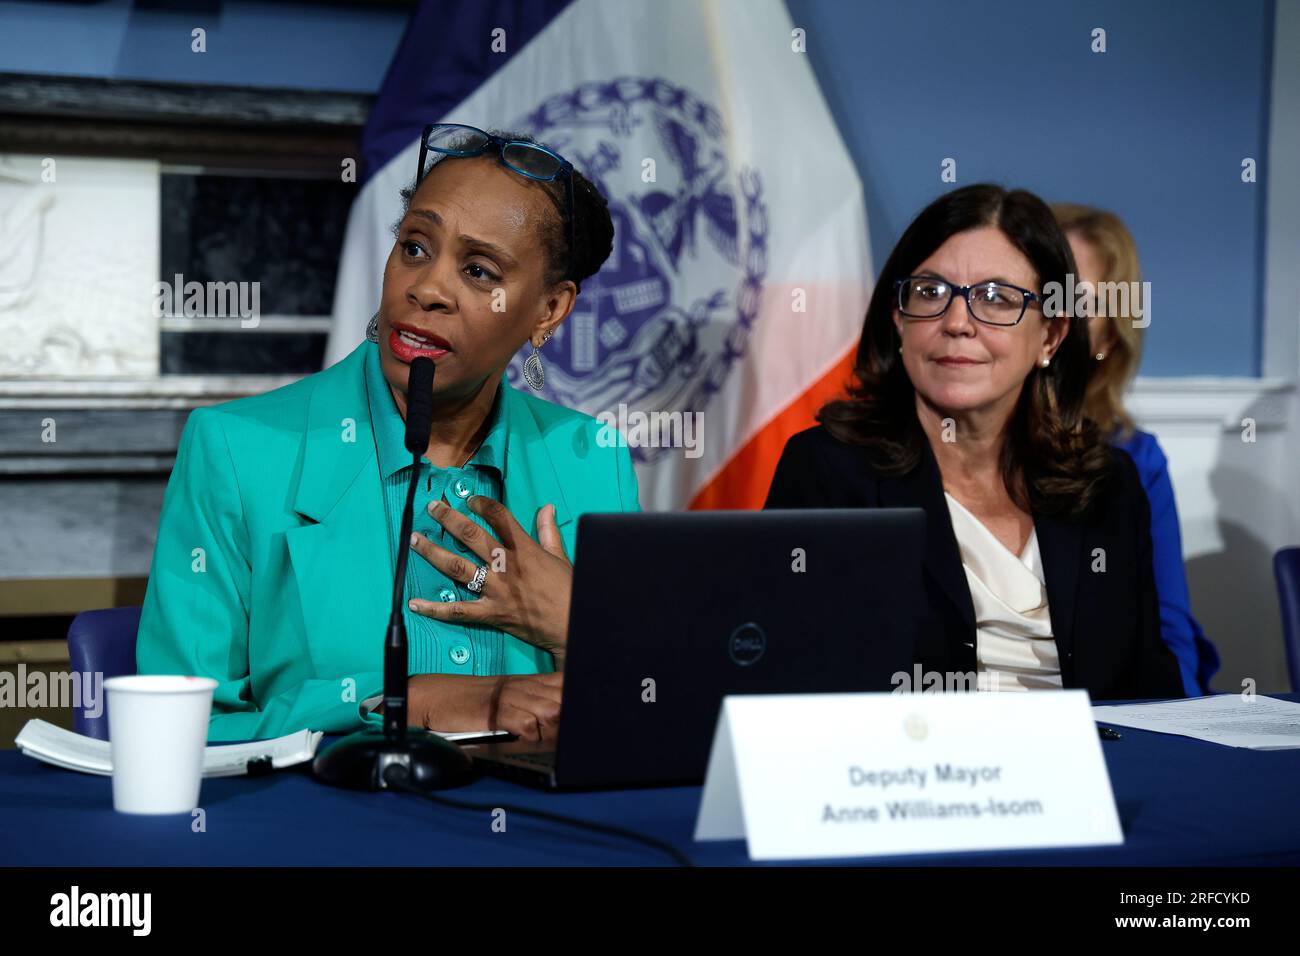 NYU Provost Georgina Dopico (C-Right) joins New York City Deputy Mayor for health and human services Anne Williams-Isom as she holds a briefing on the city's response about asylum seekers at City Hall on August 2, 2023 in New York City, USA. In the absence of a national strategy the Deputy Mayor outlined several current city programs that will enable migrants to gain shelter, education and work visas. However, the city cannot continue to absorb thousands of newcomers on its own; “ the country needs to step up” and share in the burden. (Photo by John Lamparski/Sipa USA) Stock Photo